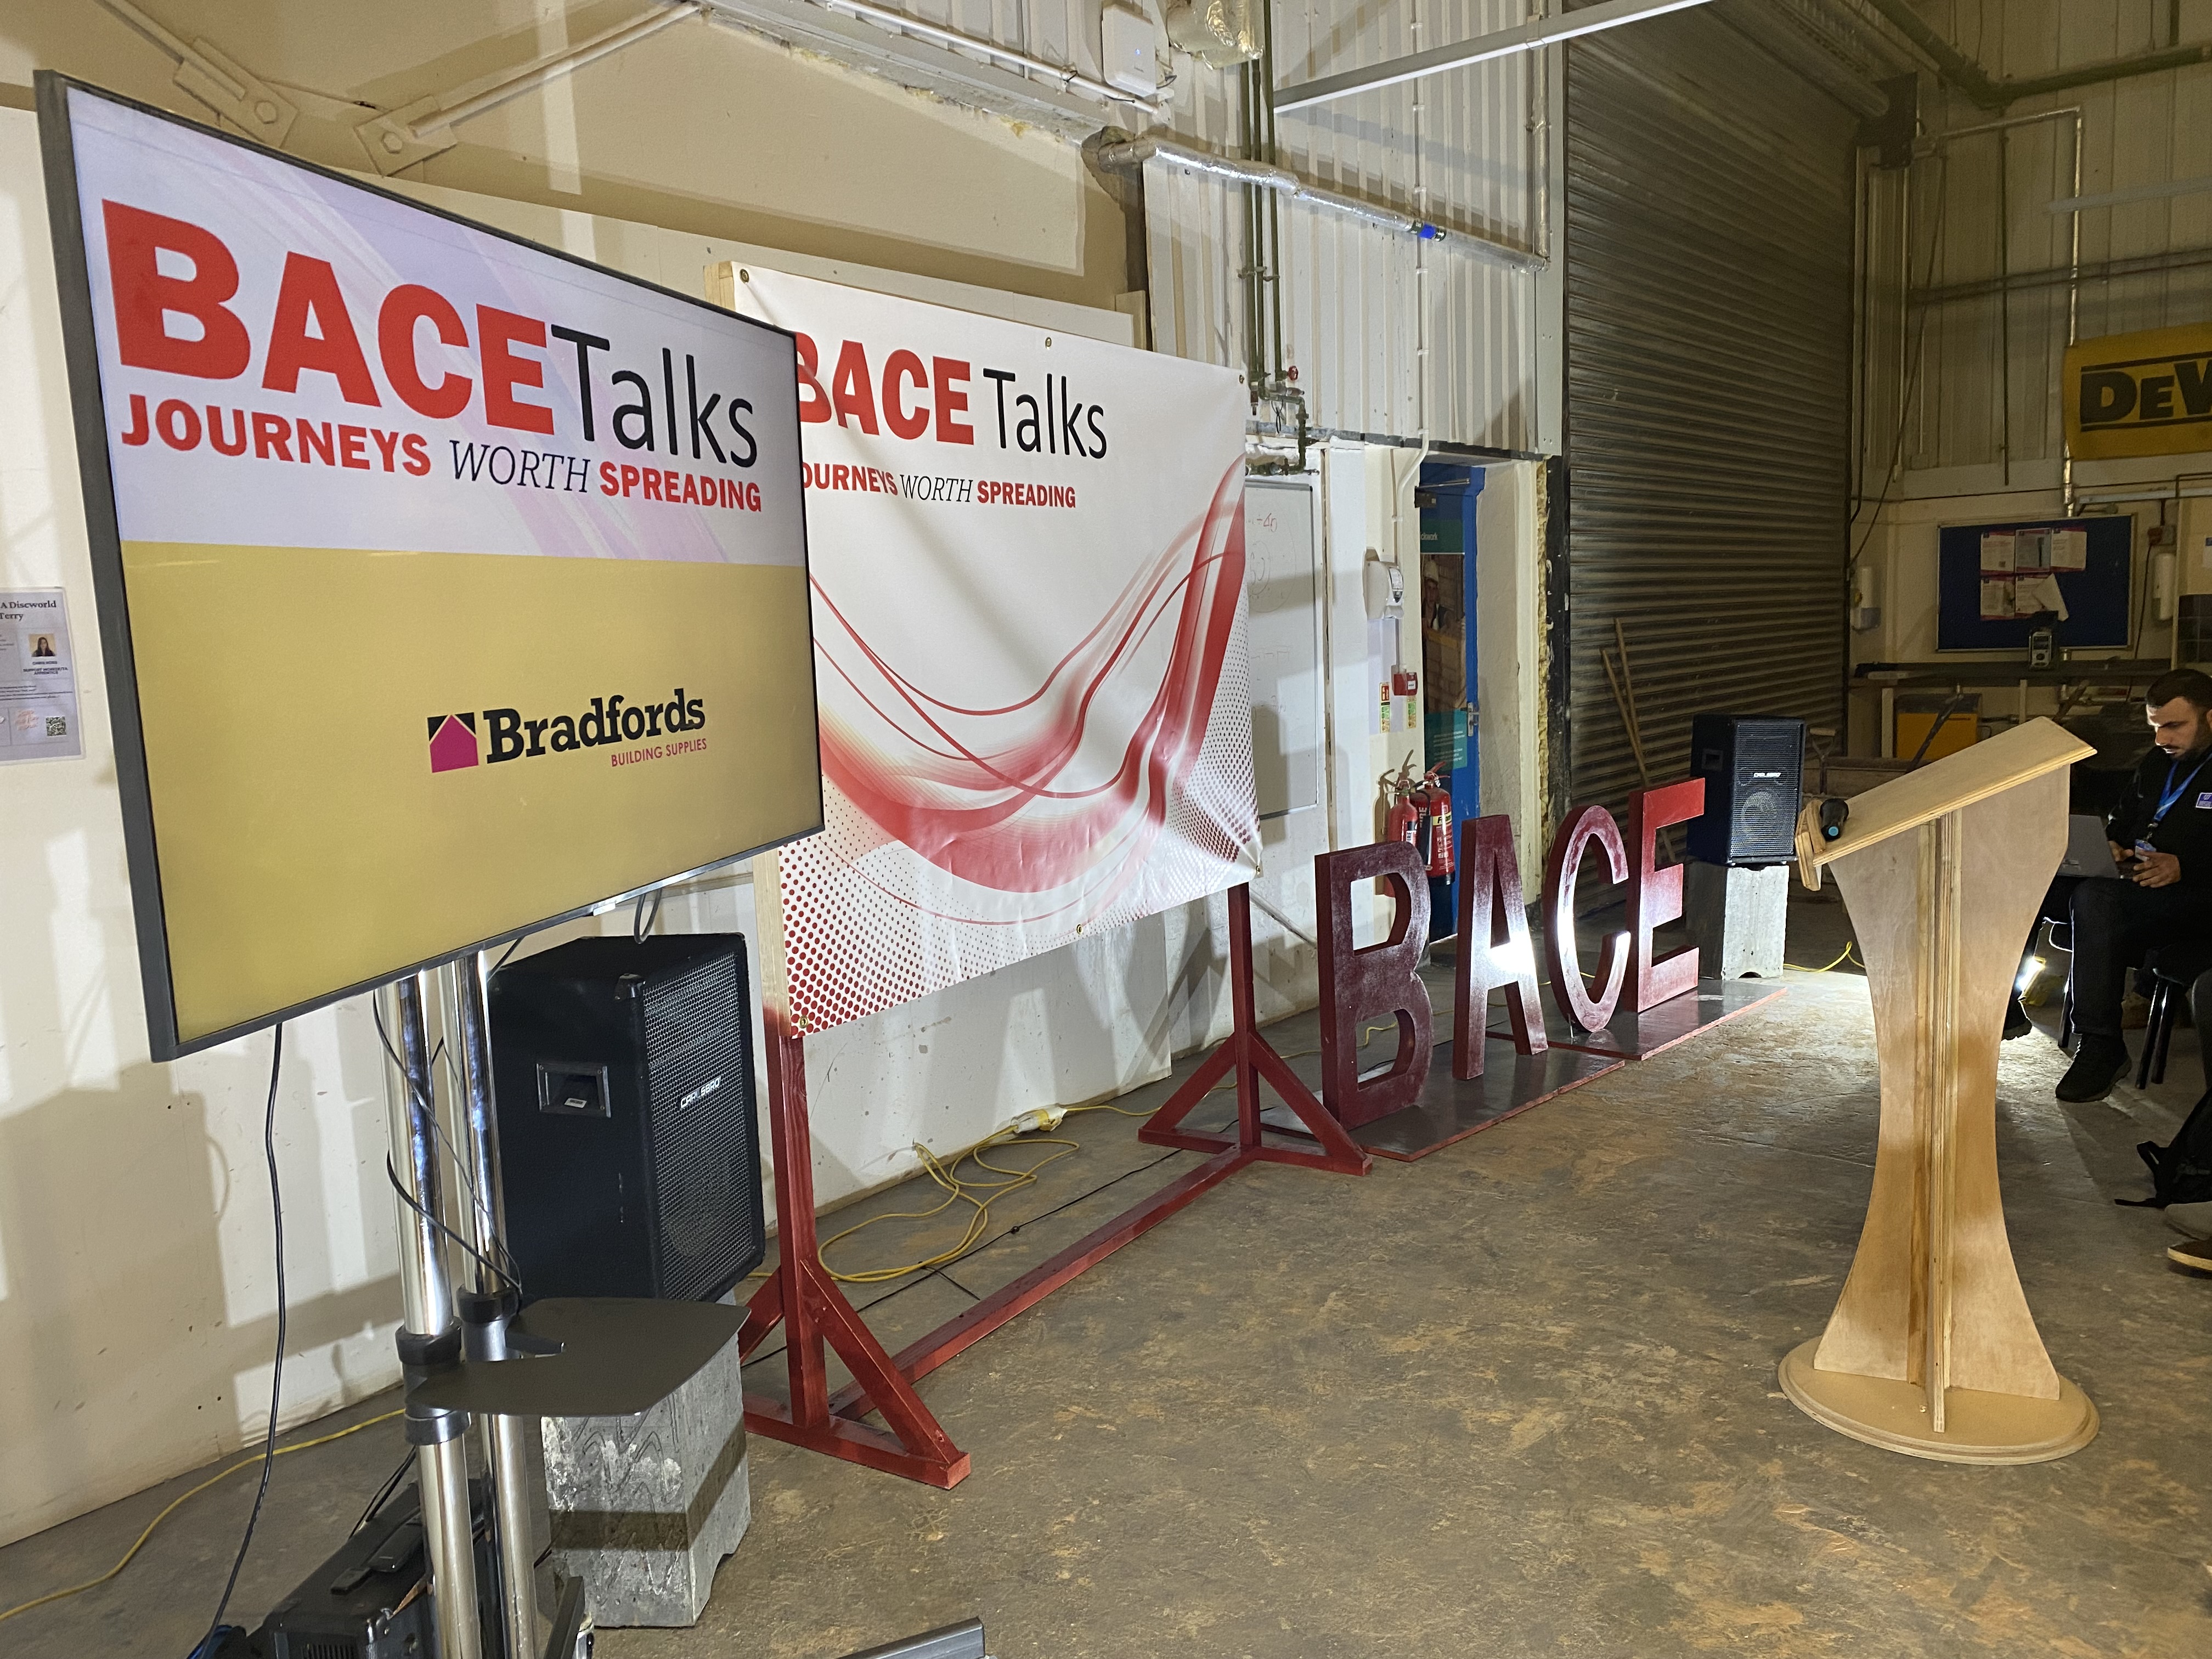 BACE Talks screen in front of BACE Talks background